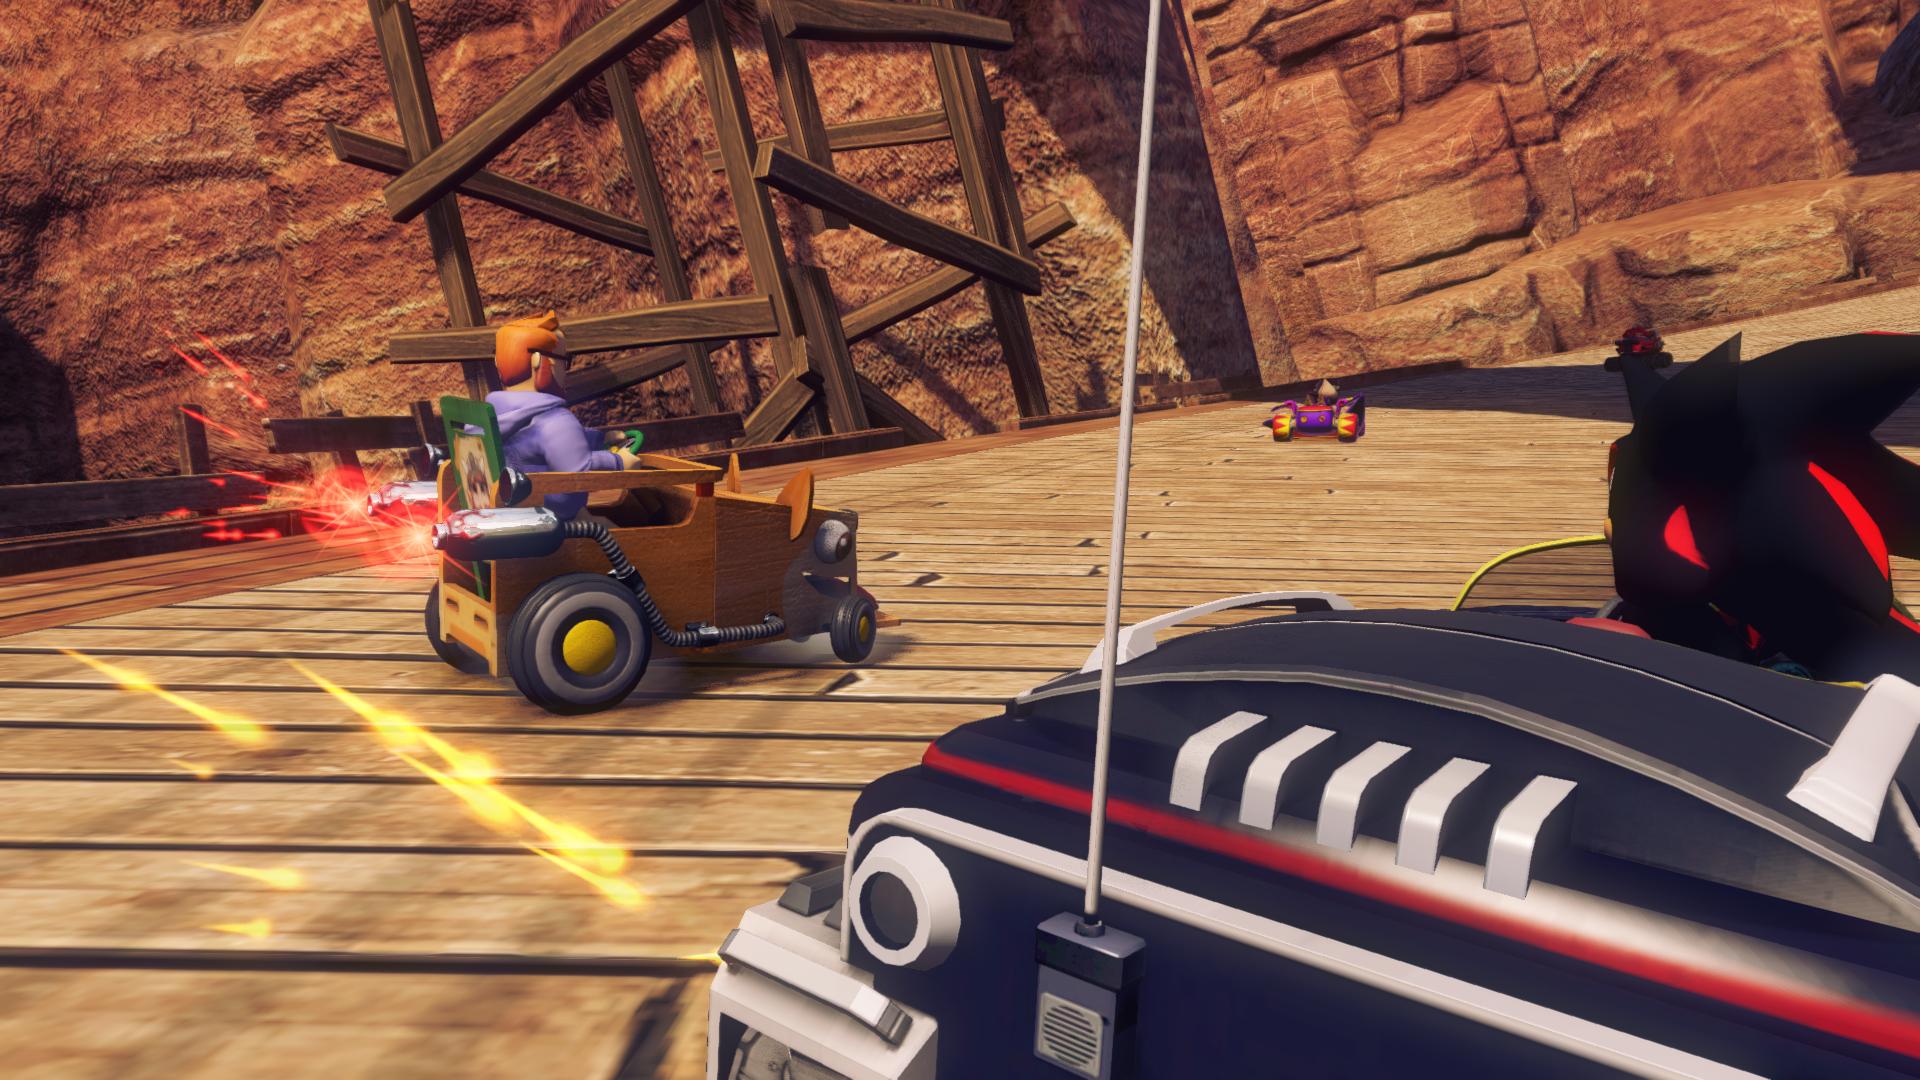 [$ 51.92] Sonic and All-Stars Racing Transformed - Yogscast DLC Steam Gift